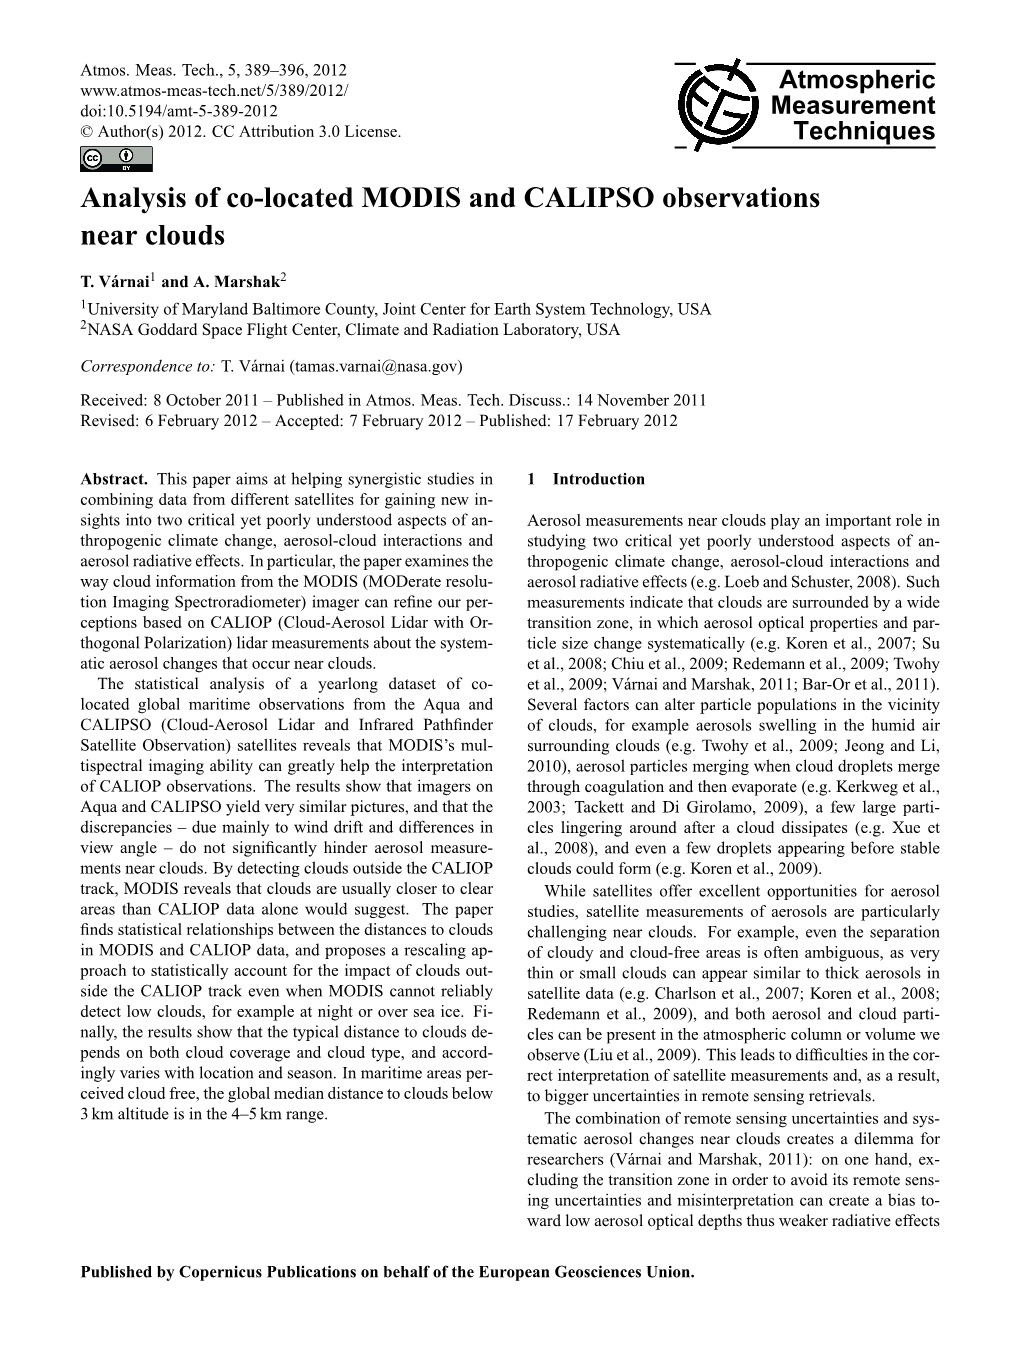 Analysis of Co-Located MODIS and CALIPSO Observations Near Clouds